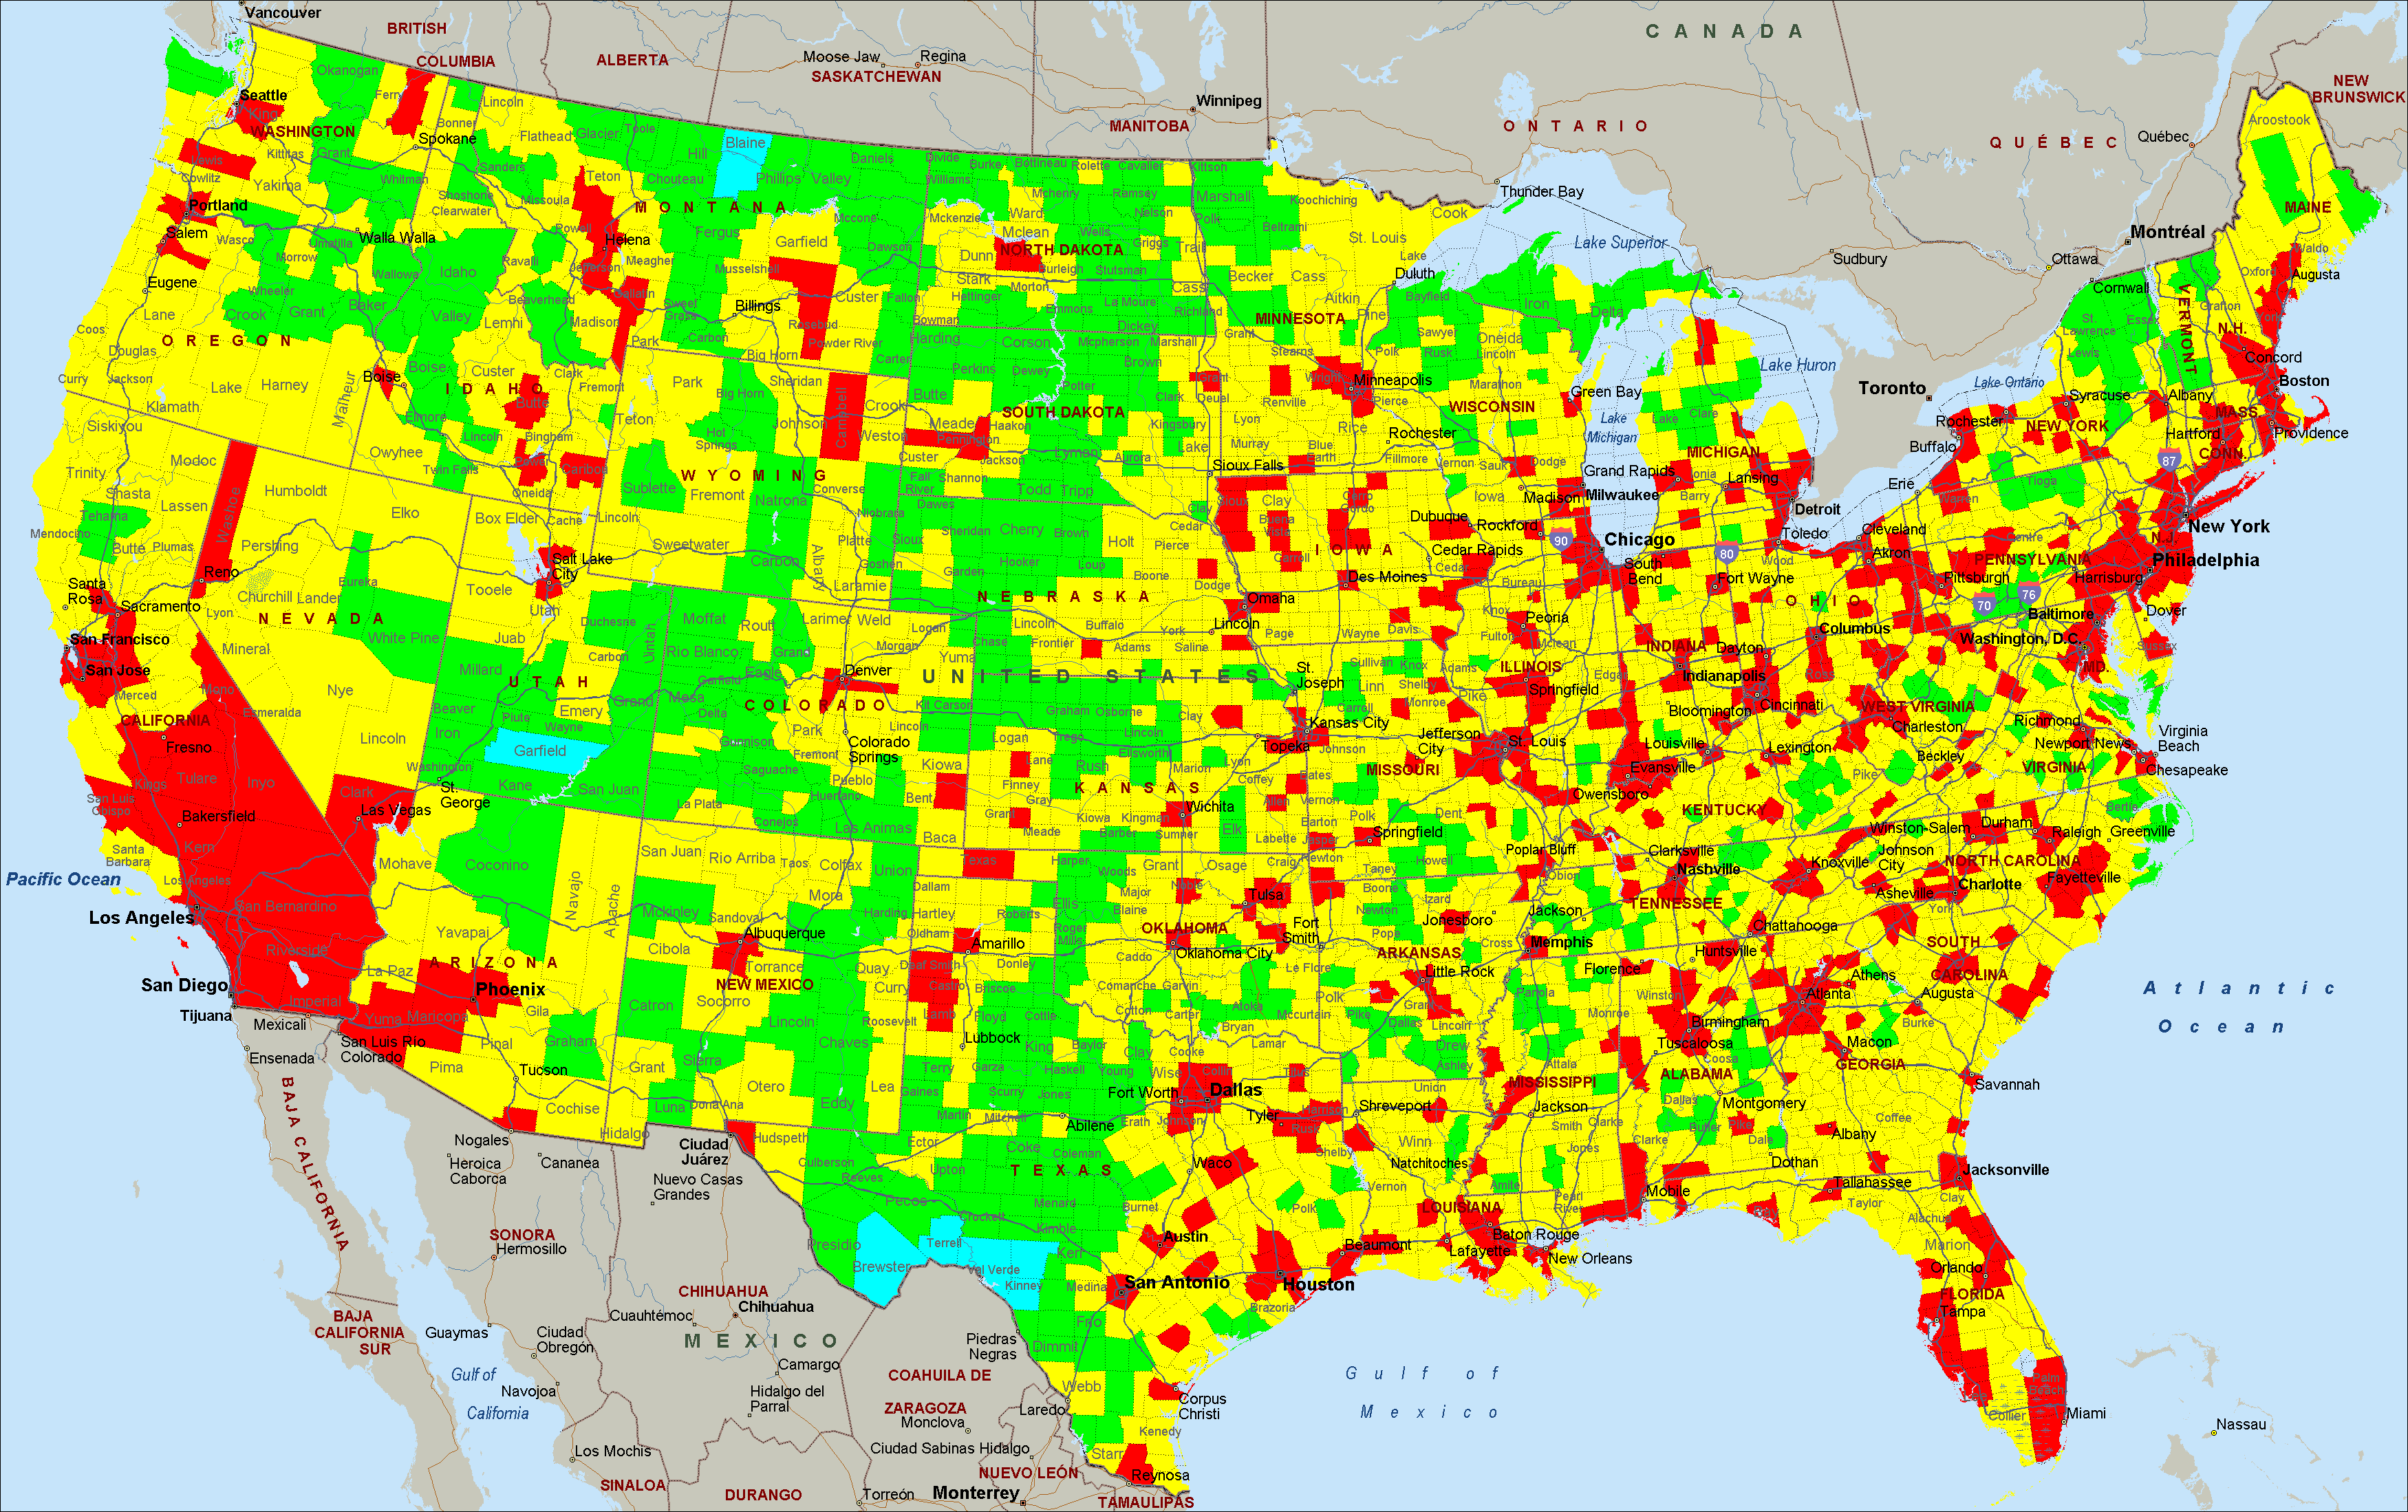 United States Air Quality Map